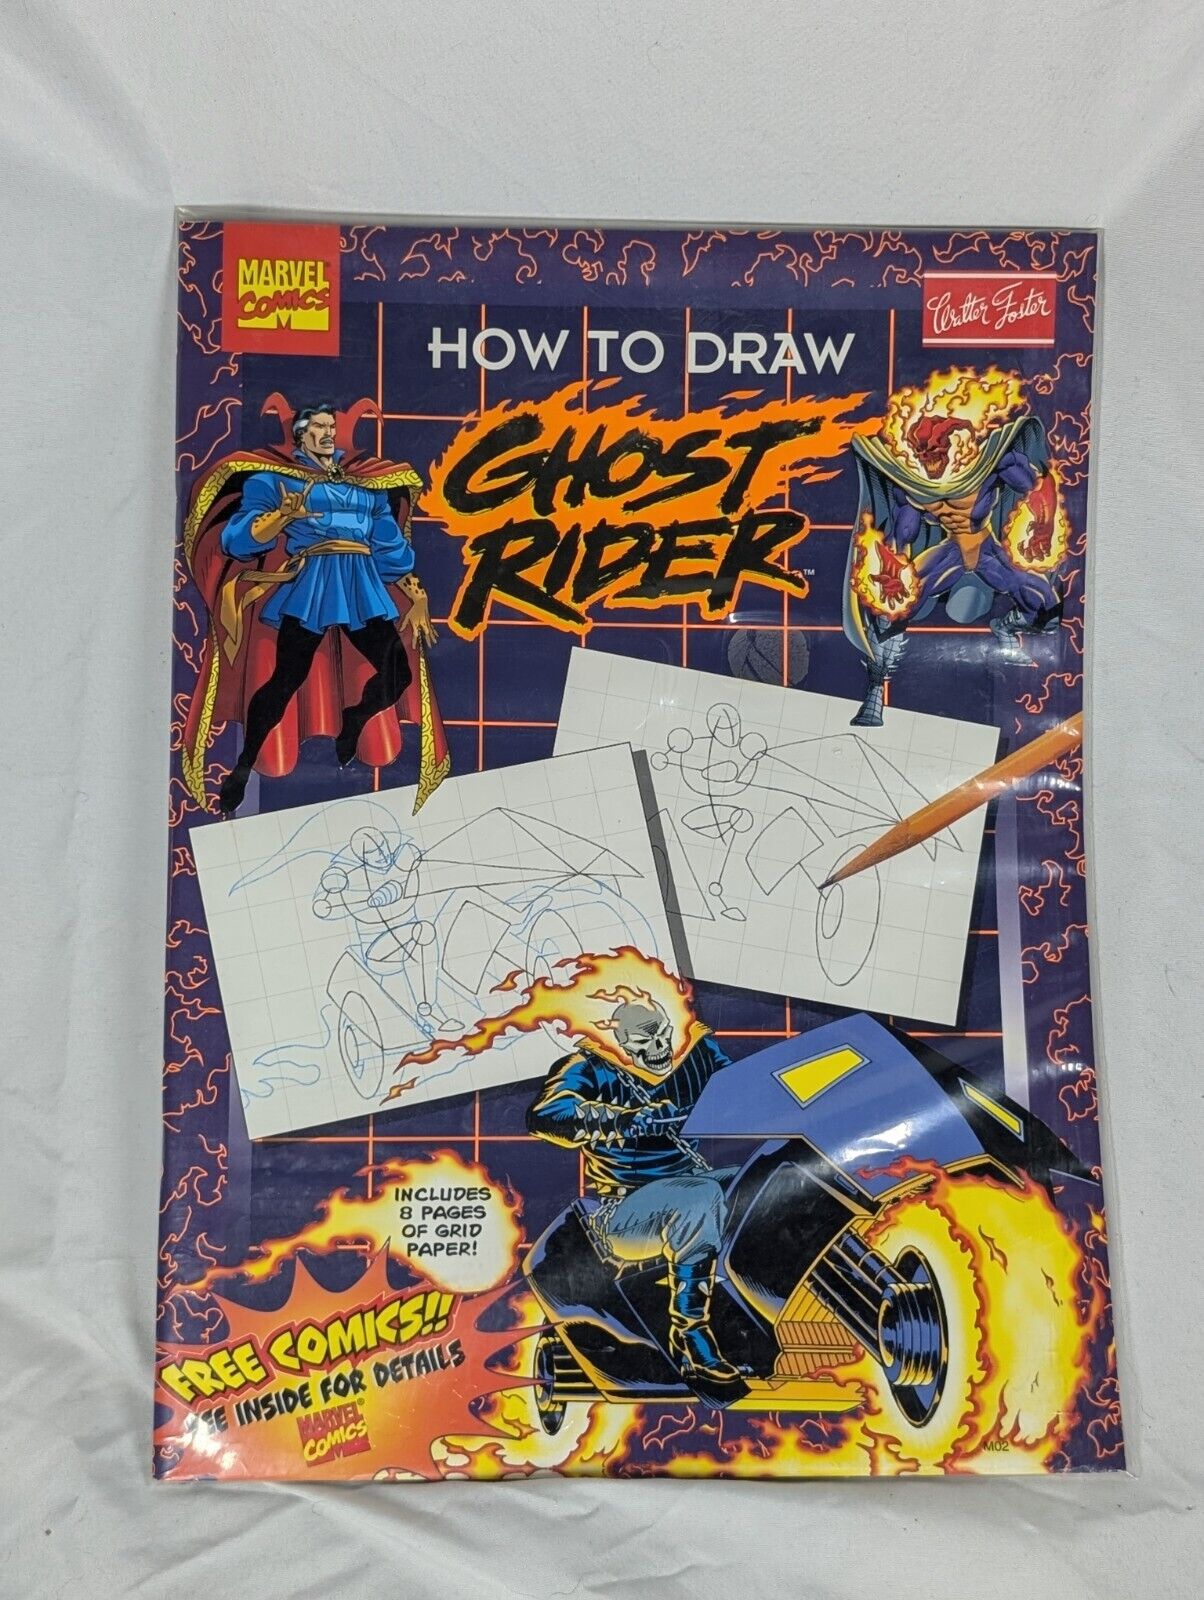 RARE Vintage Marvel Comics - 1996- How To Draw GHOST RIDER - Walter Foster